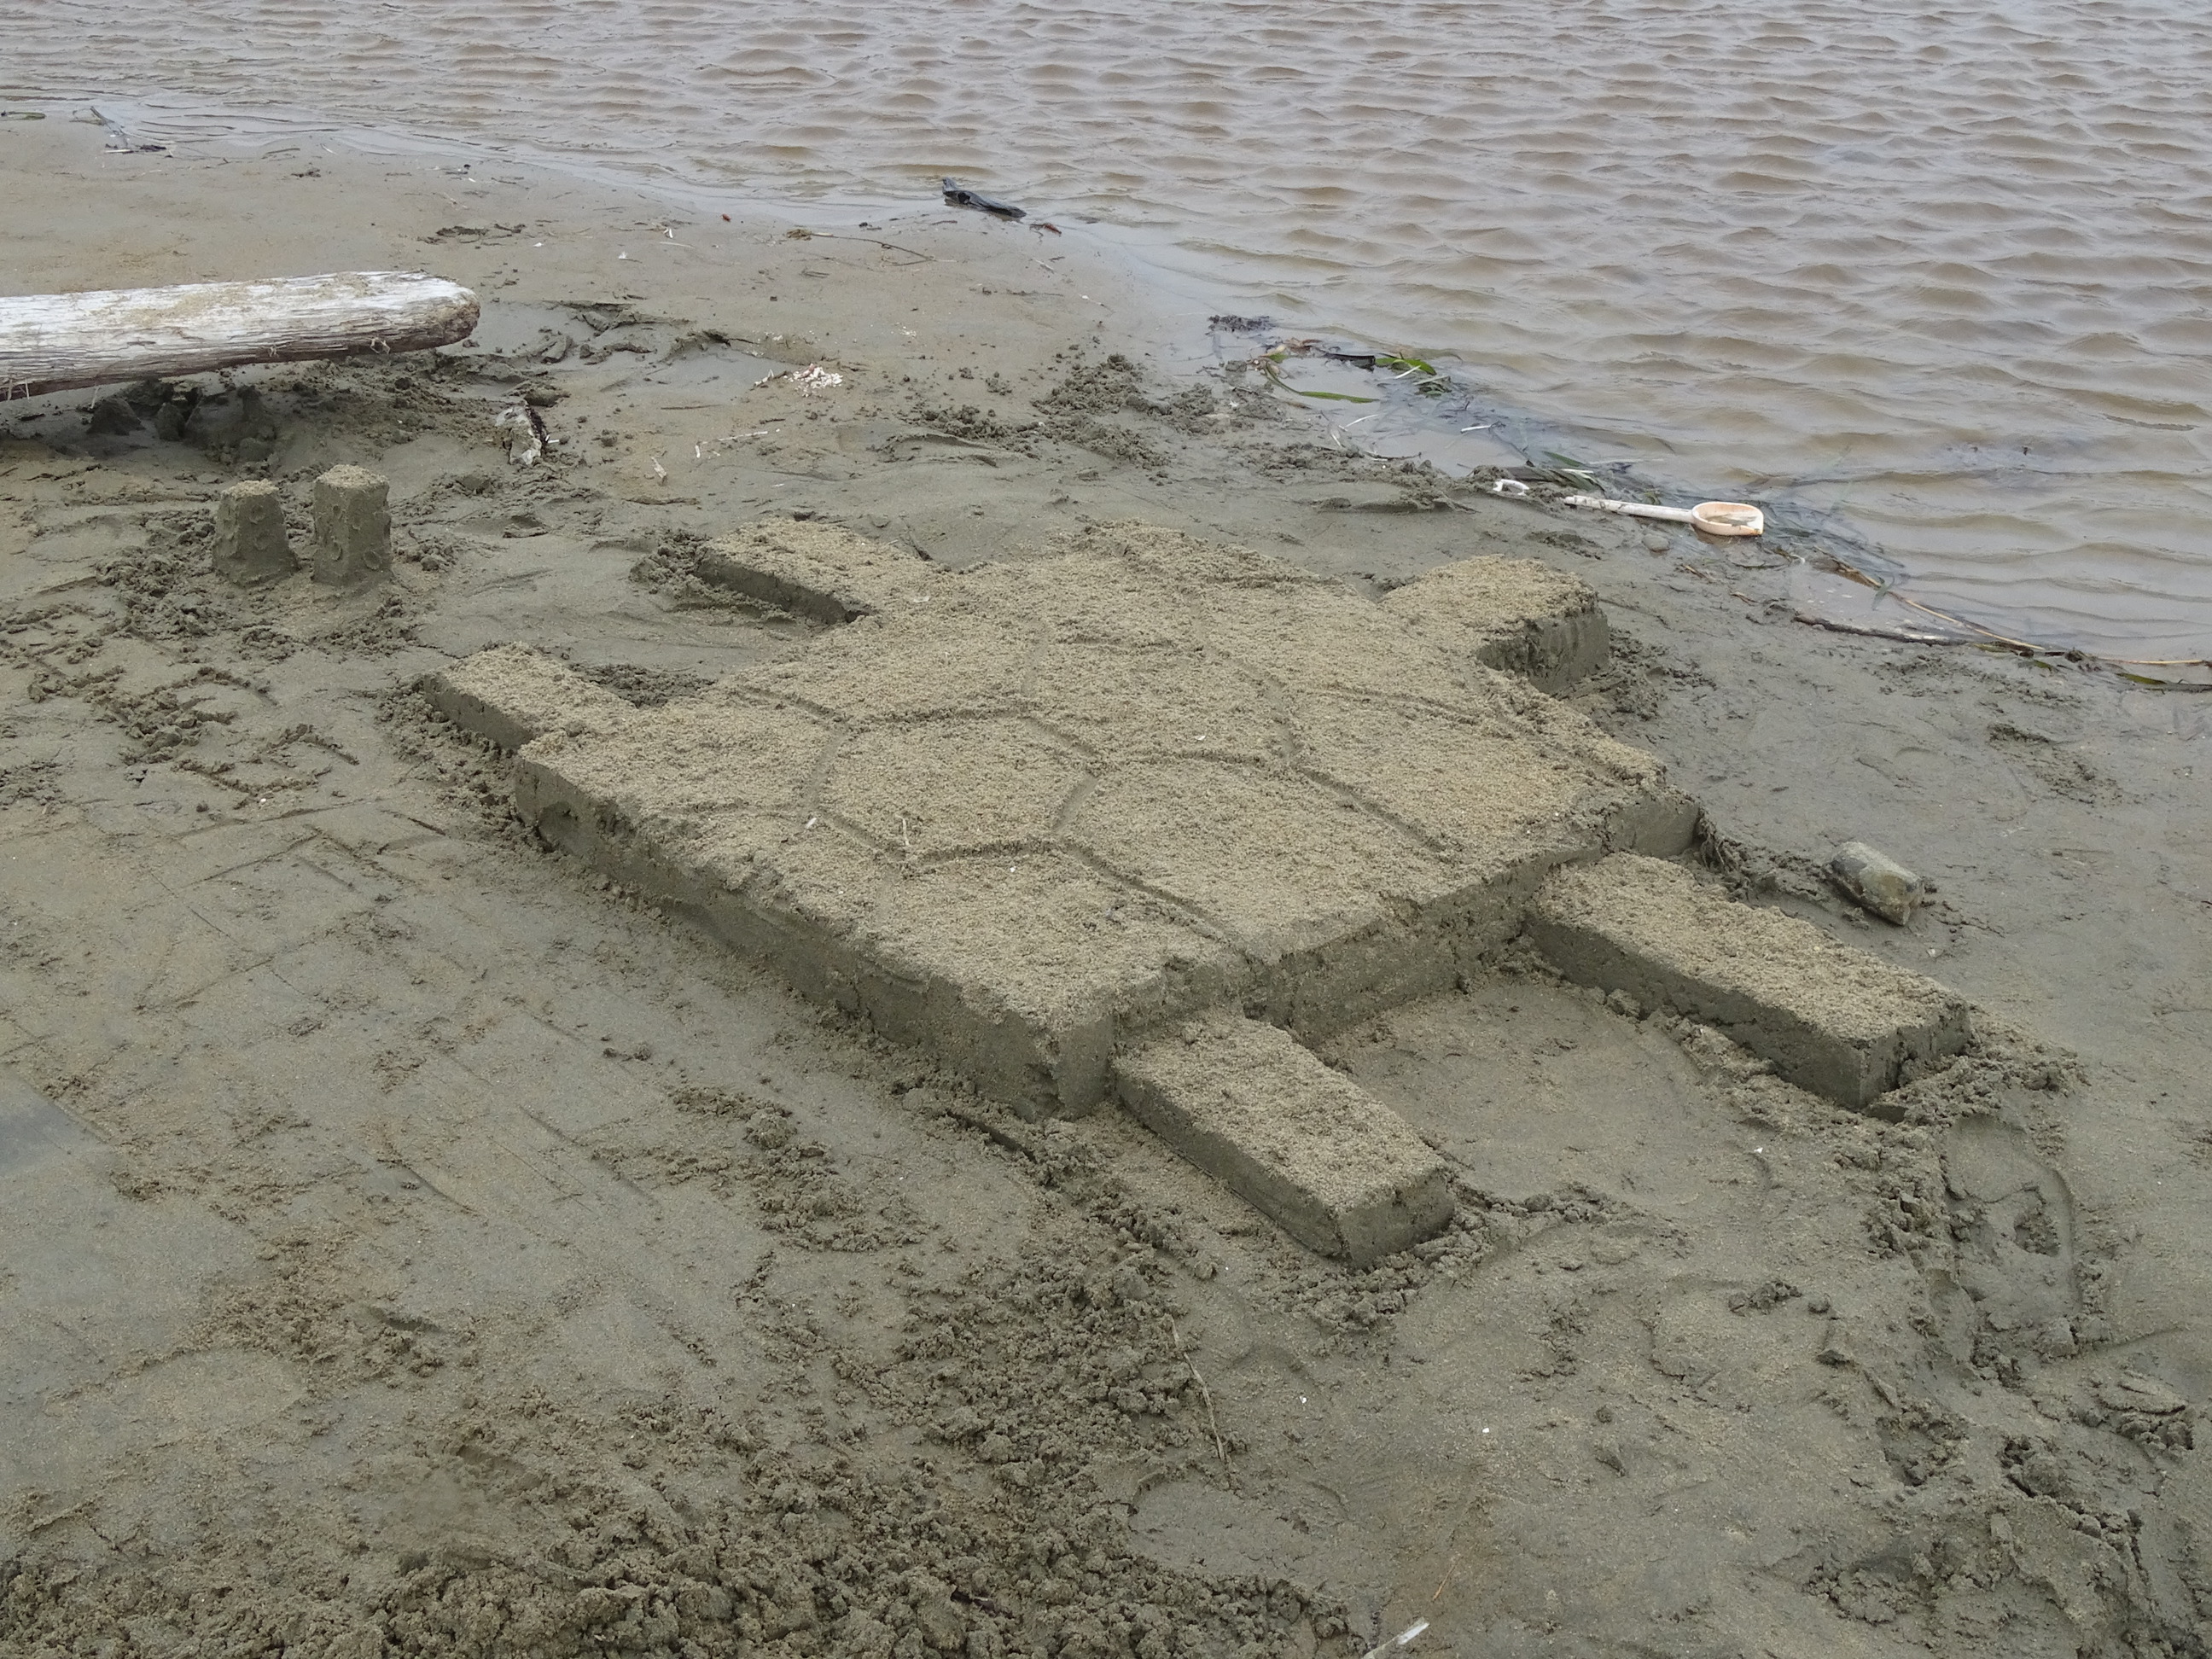 A sand sculpture of a sea turtle with a Minecraft theme, e.g., a turtle with blocky square and rectangular body, head, and flippers.